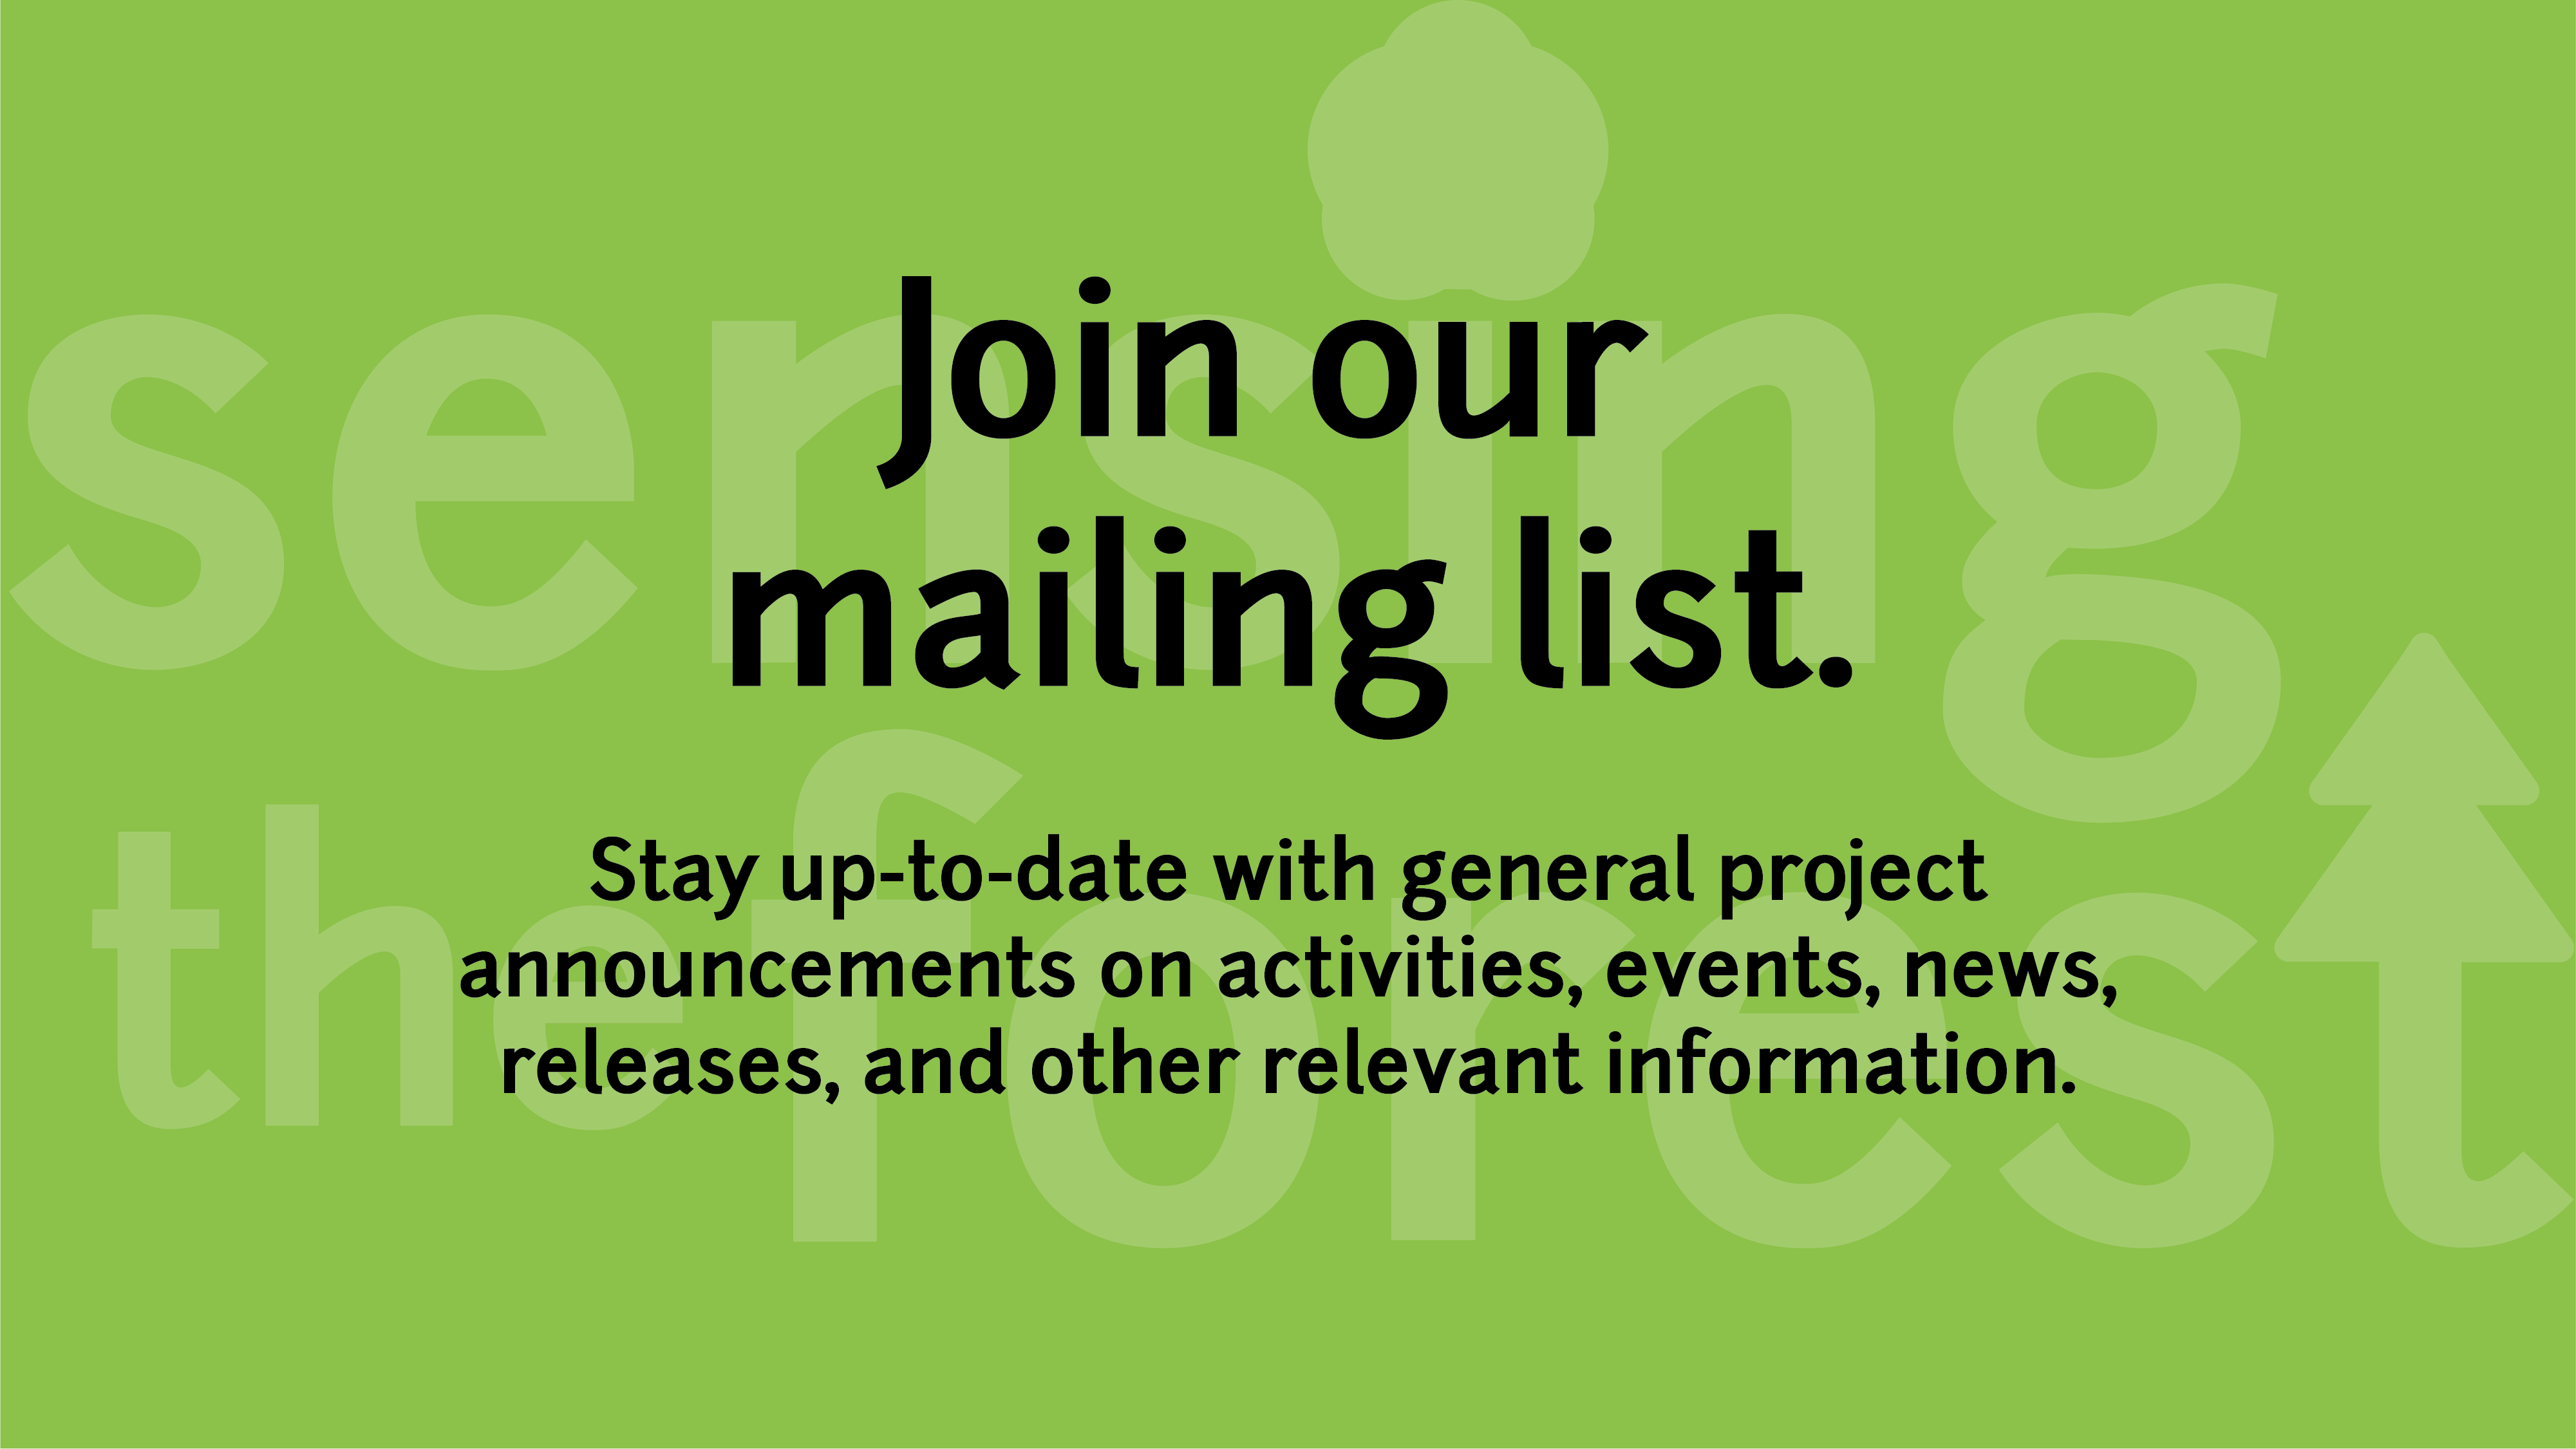 We Have a Mailing List!